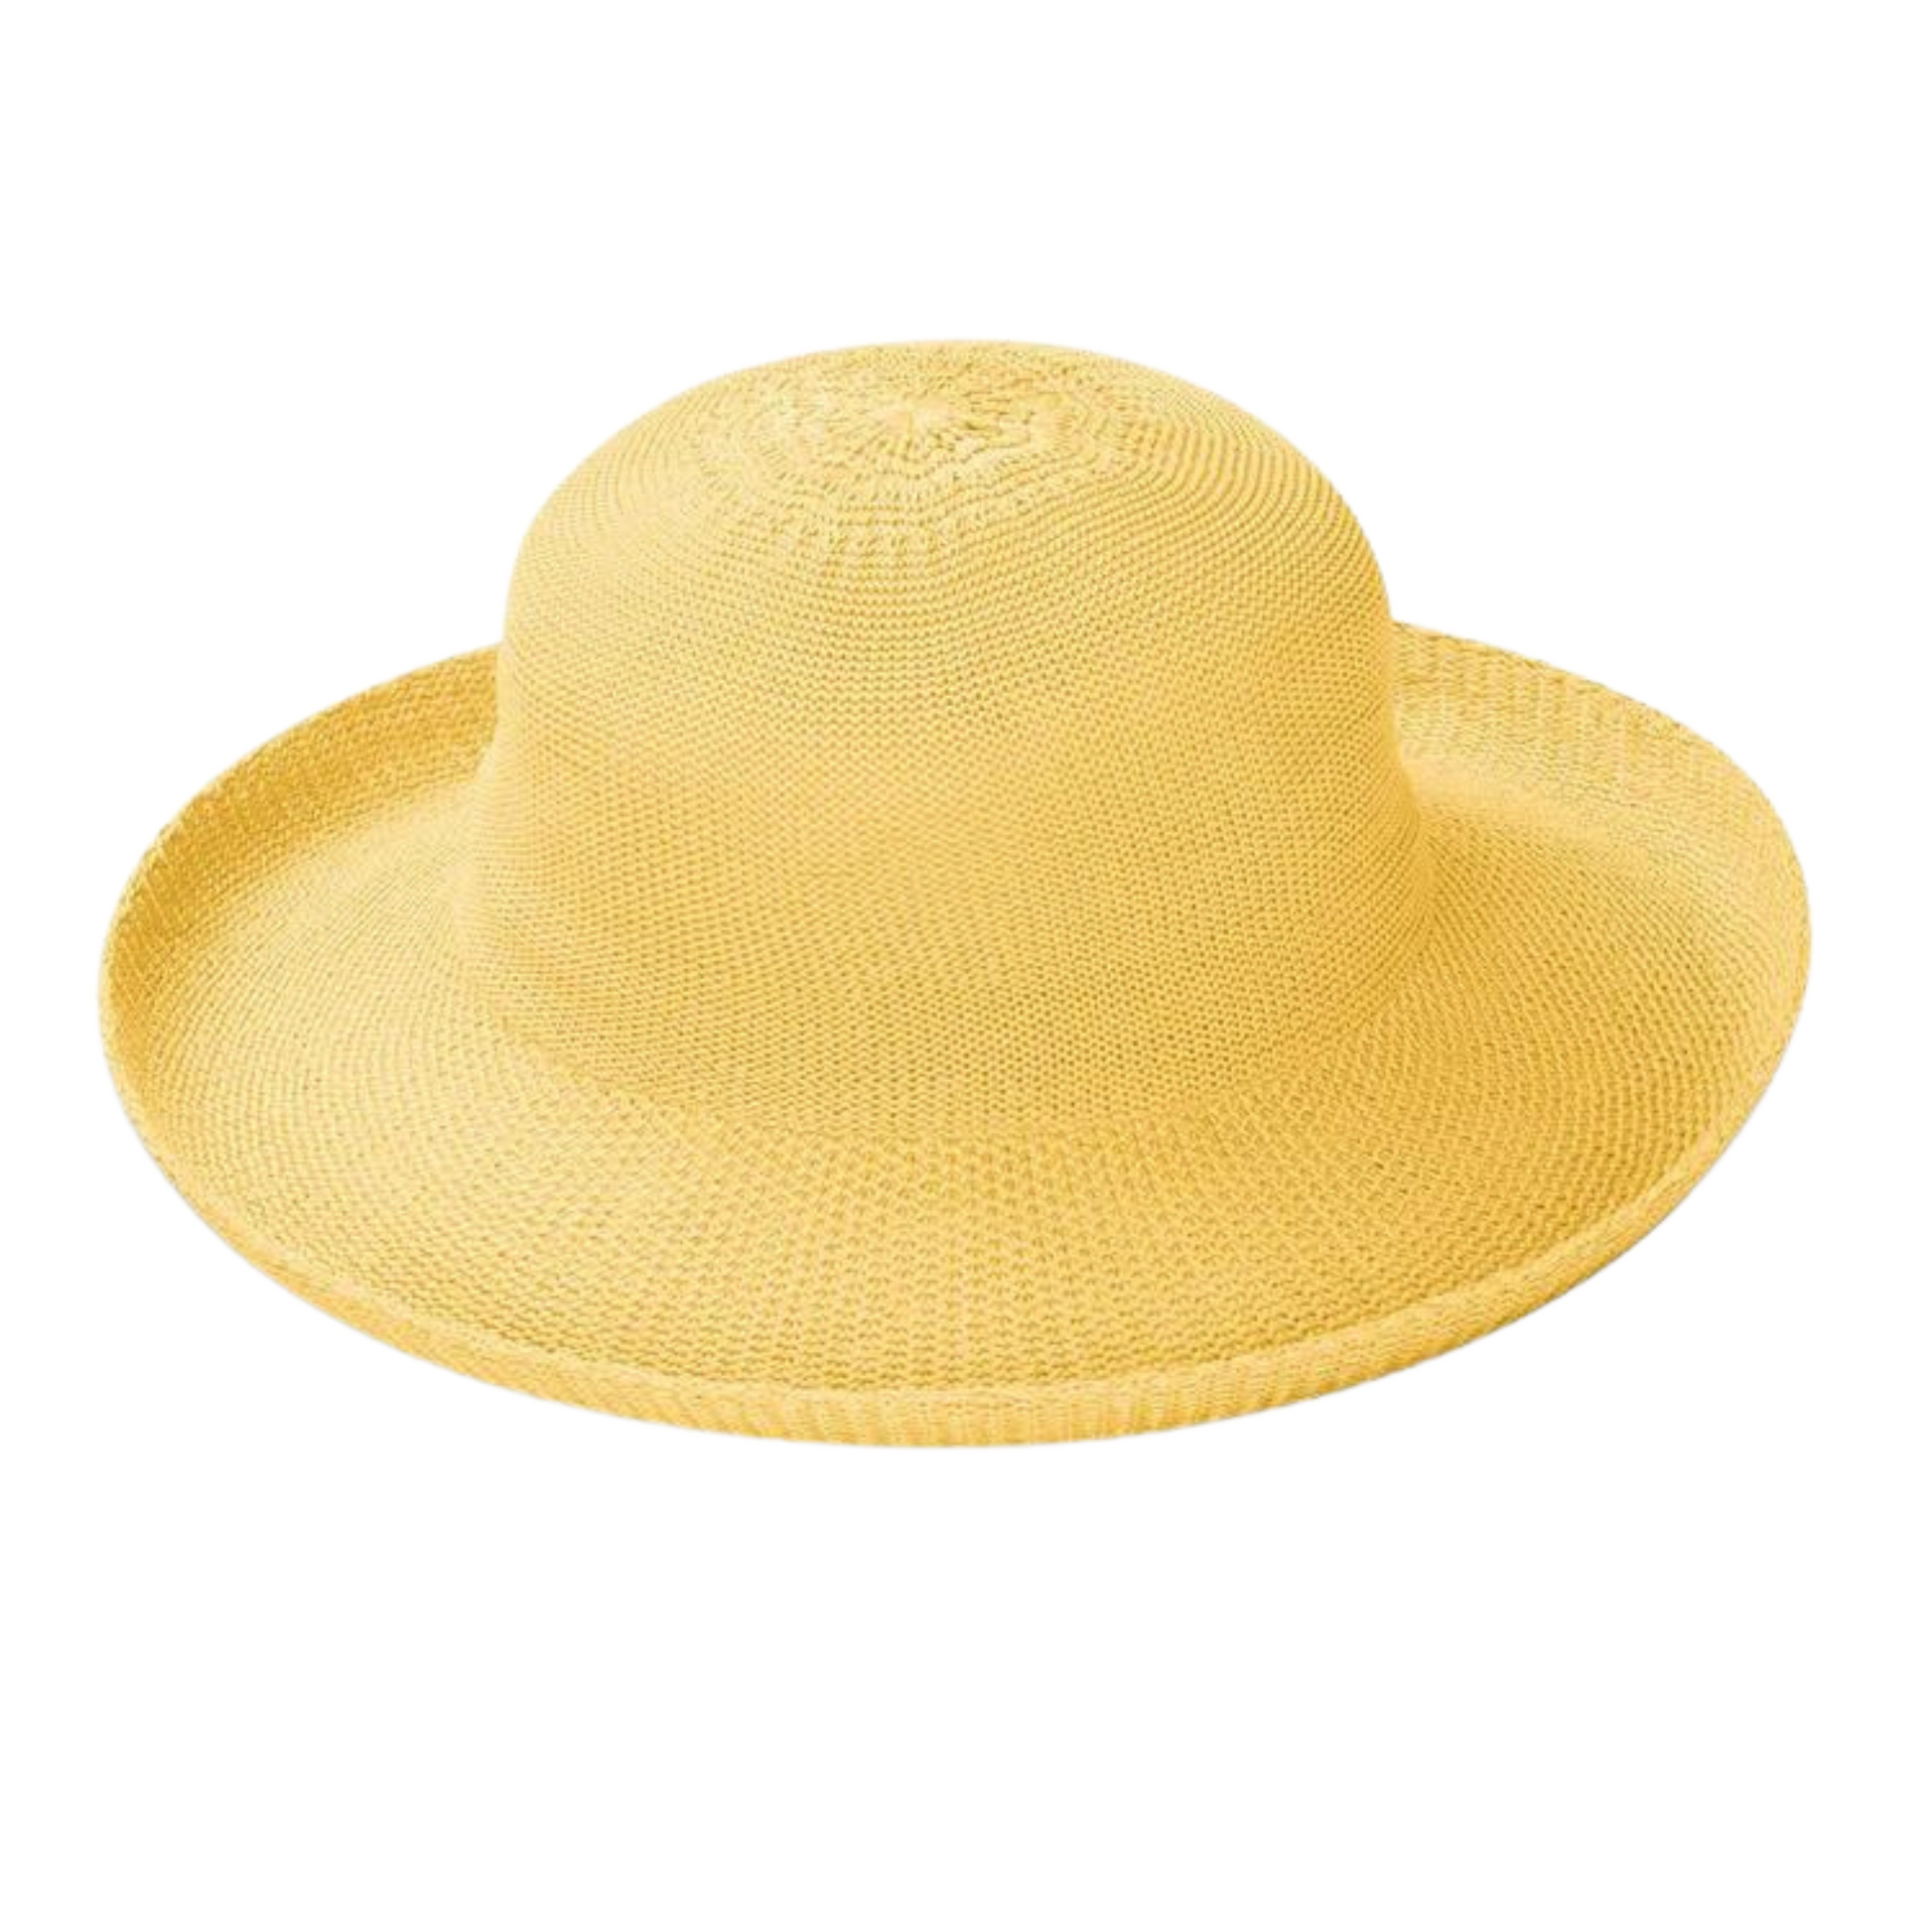 Light yellow weaved hat with soft curvature and rolled in brim.